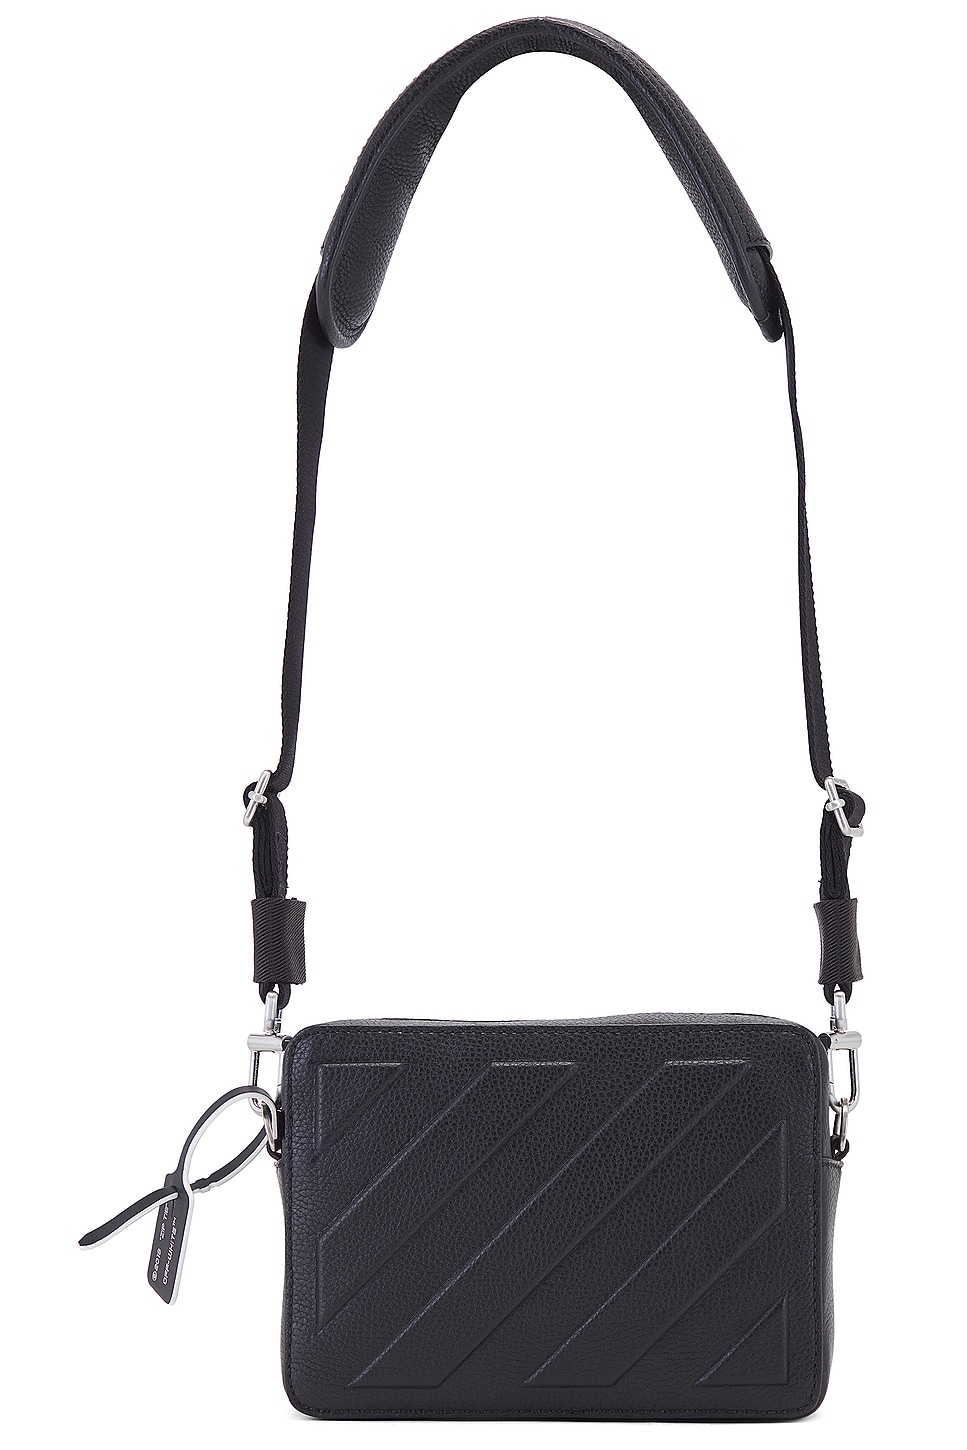 OFF-WHITE Diag Leather Camera Bag in Black